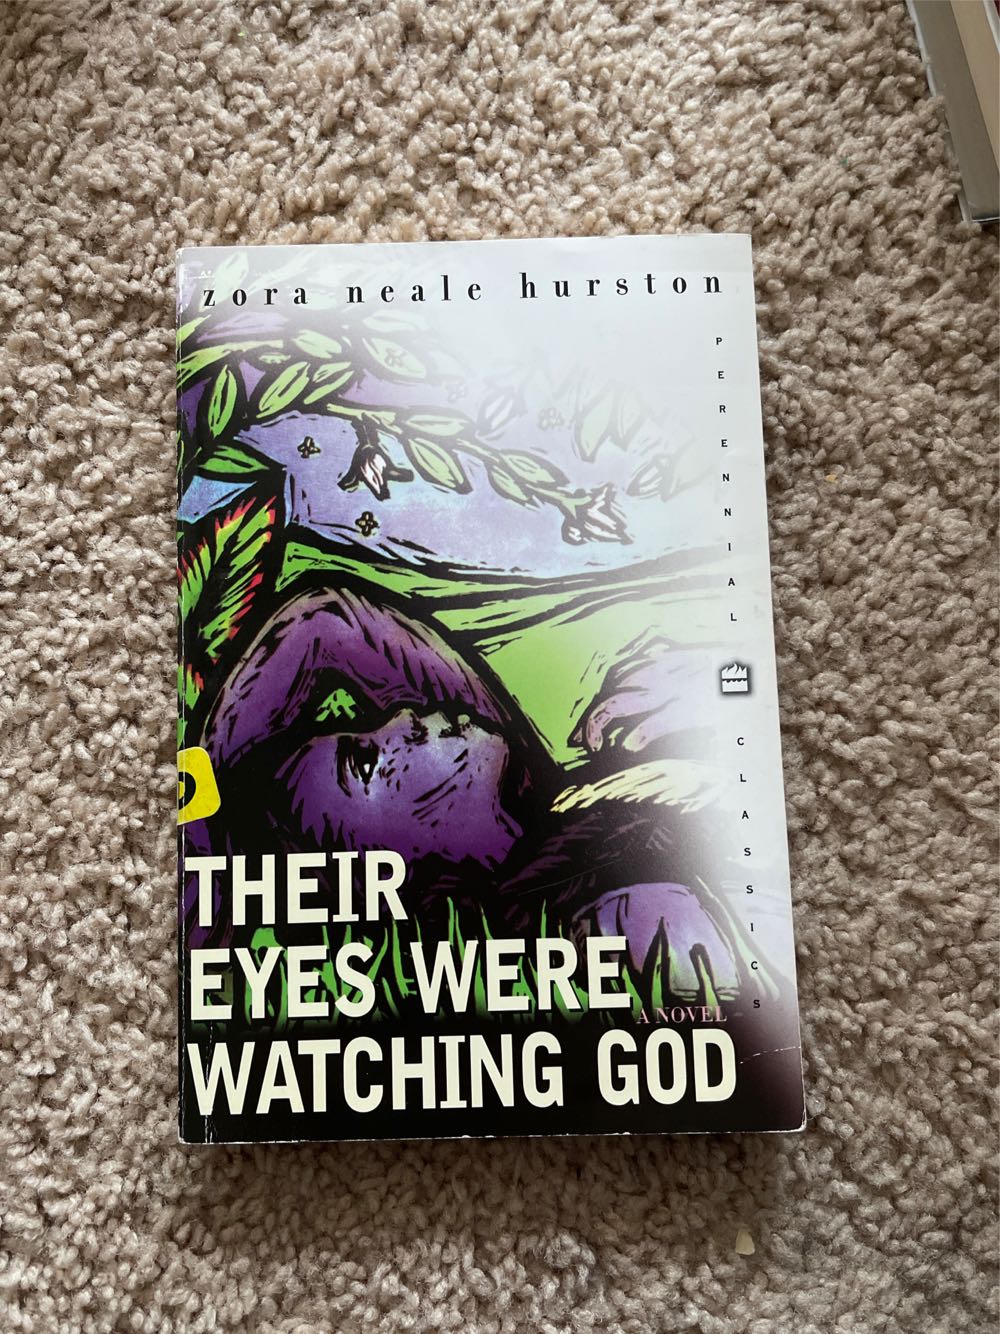 Their Eyes Were Watching God - Zora Neale Hurston (Perennial Classic - Paperback) book collectible [Barcode 9780060931414] - Main Image 3